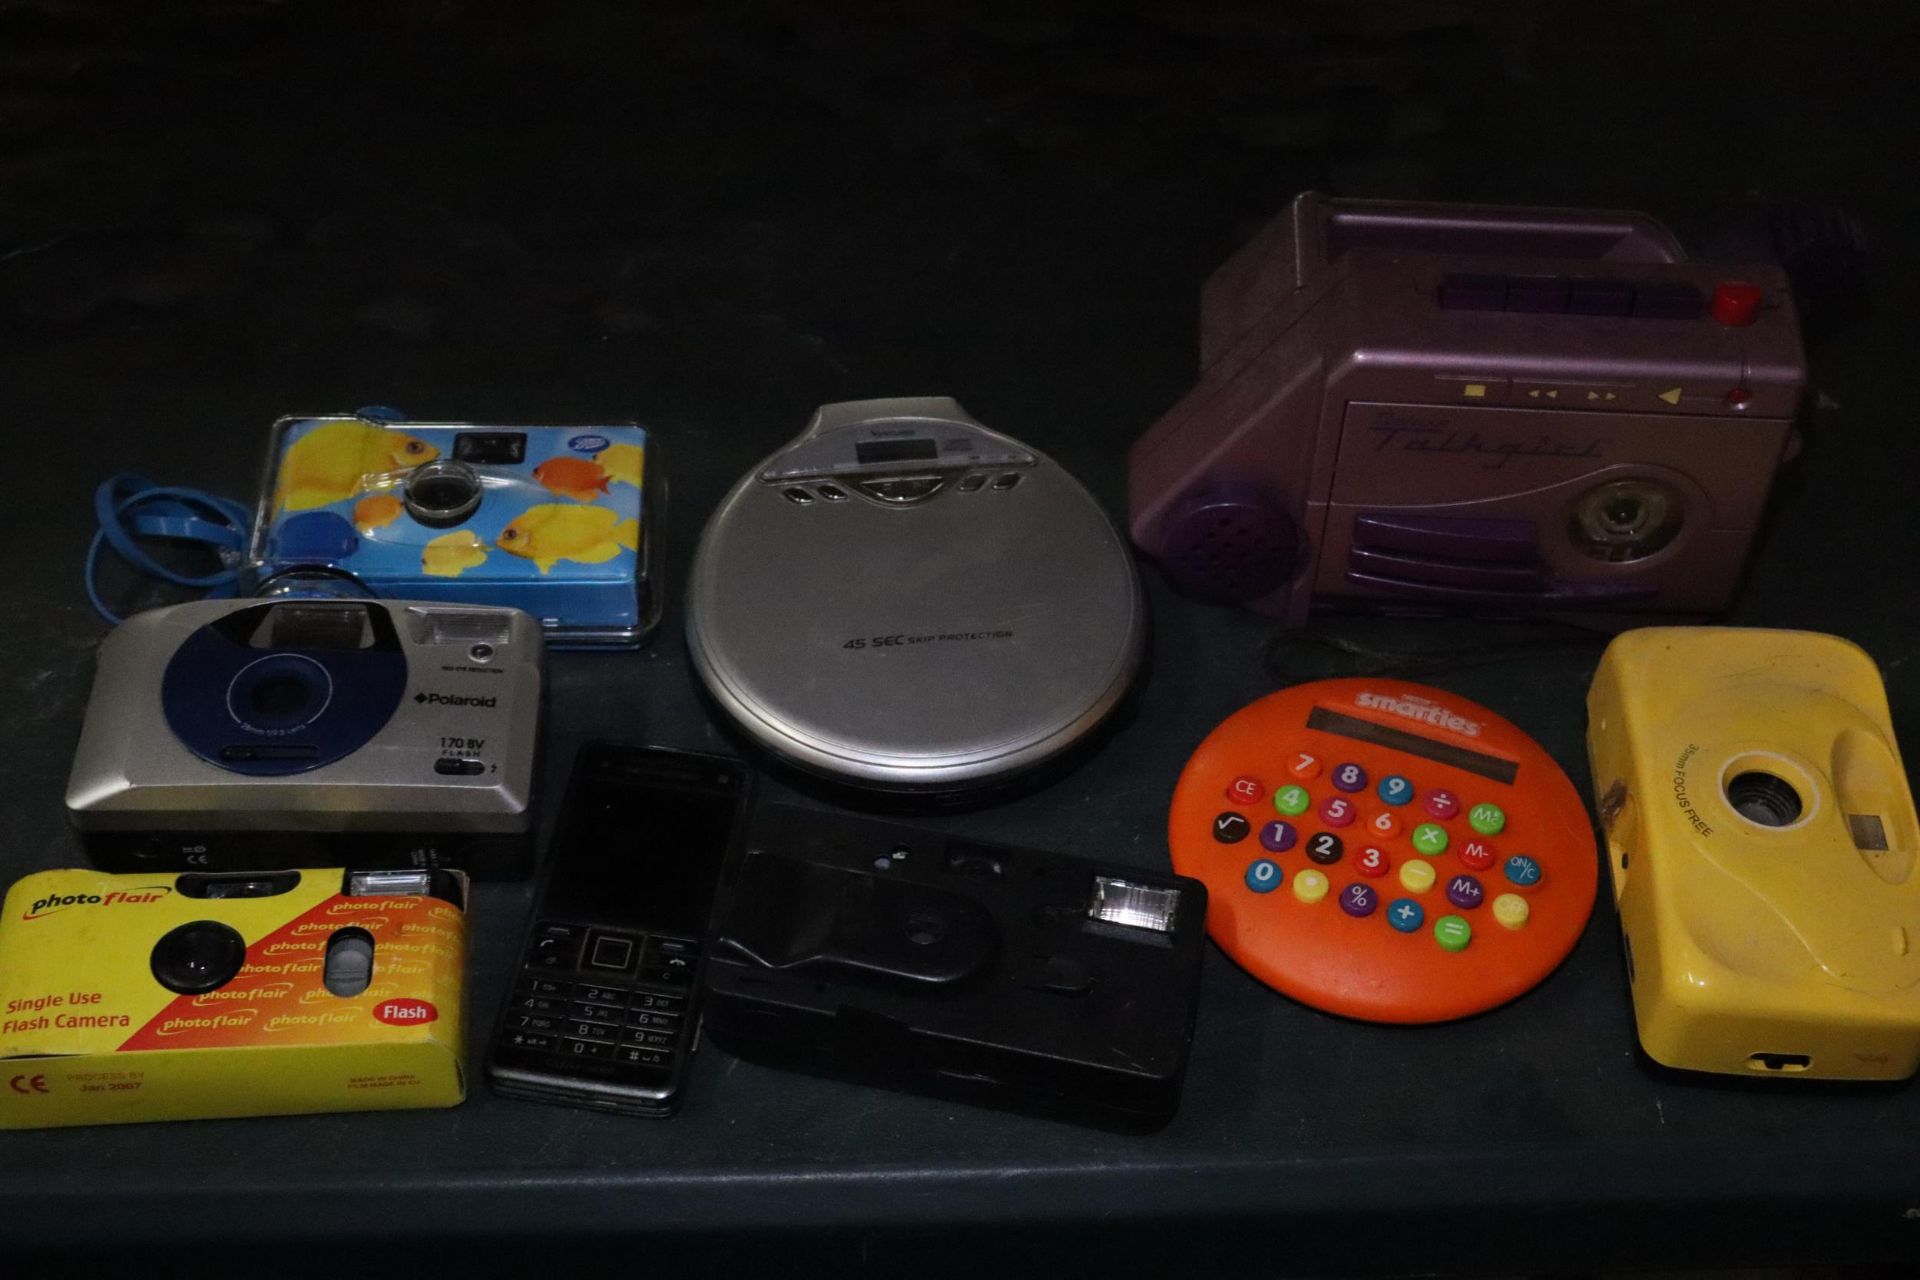 A COLLECTION OF FIVE CAMERAS, A PORTABLE CD PLAYER, 'TALKGIRL' CASSETTE PLAYER AND A SMARTIES